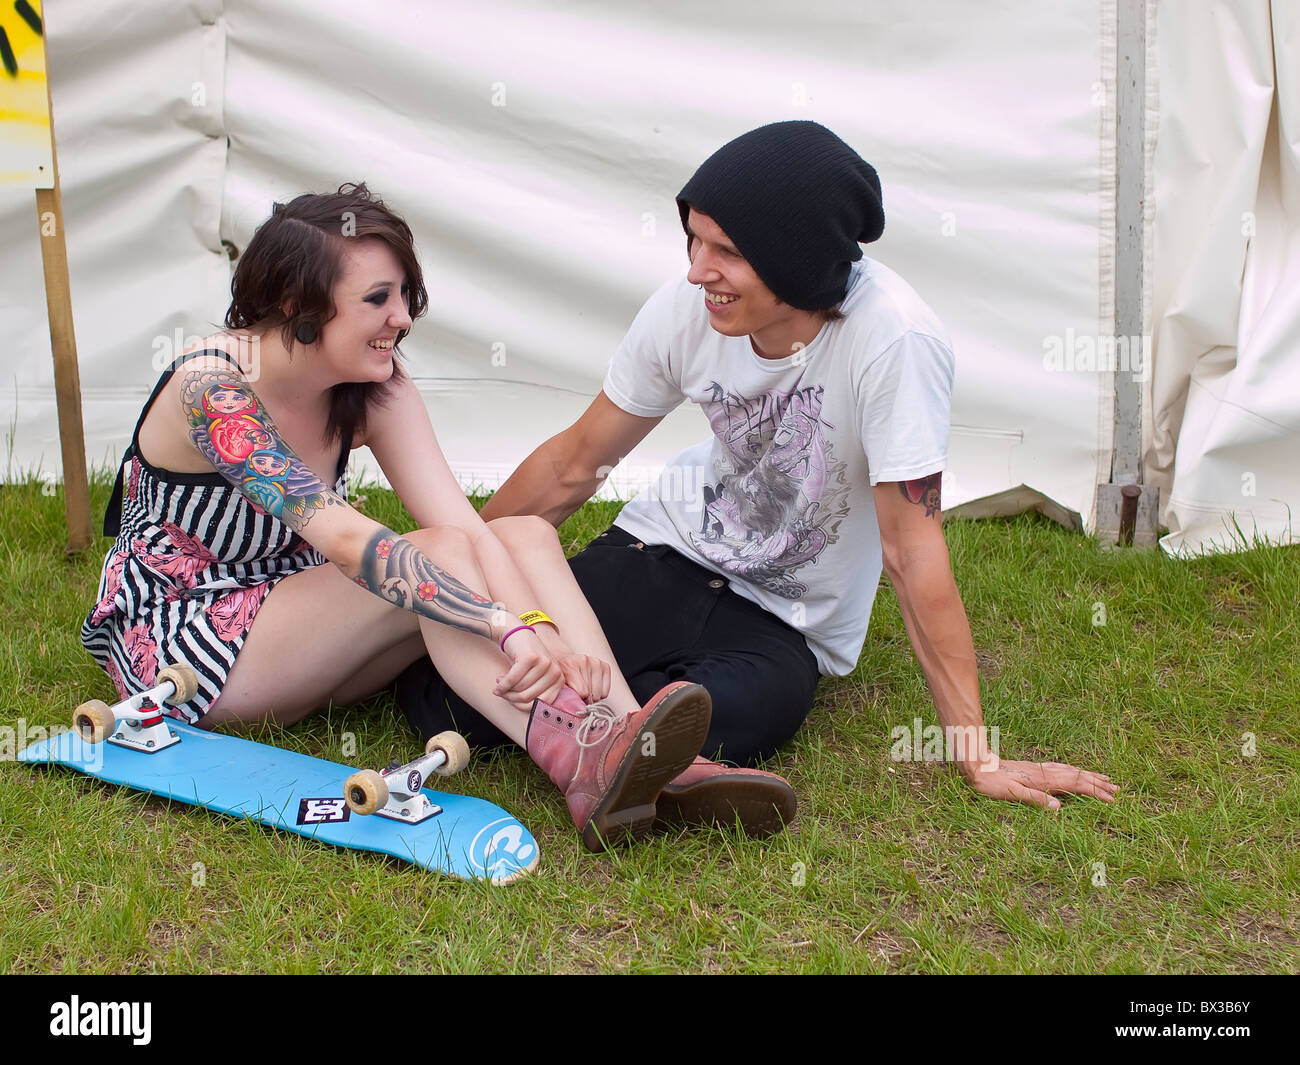 Lucy a trendy young female adult nineteen year old with tattoos with boy friend Blair (real people) at youth festival Stock Photo